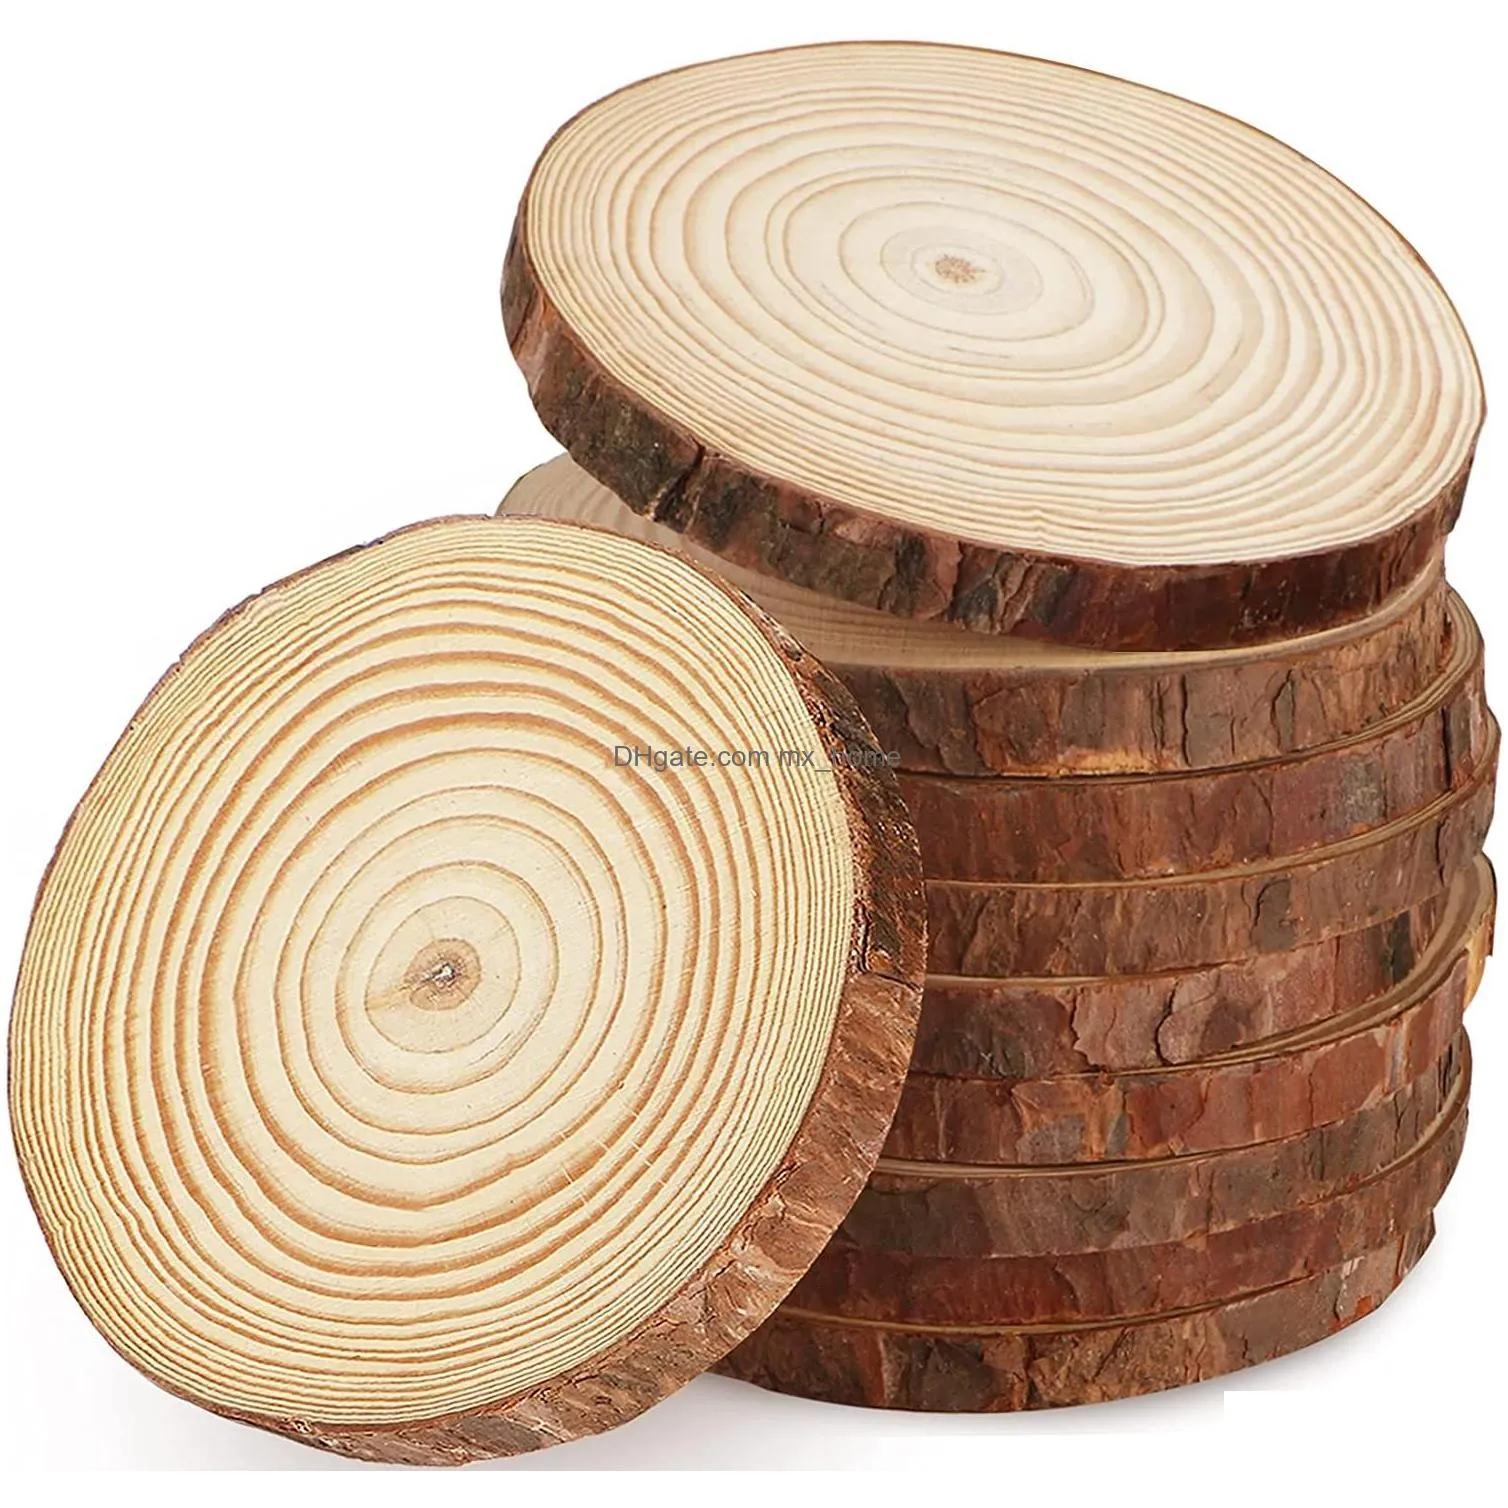 natural pine wood slices diy craft unfinished wood kit predrilled with hole circles arts party christmas ornaments